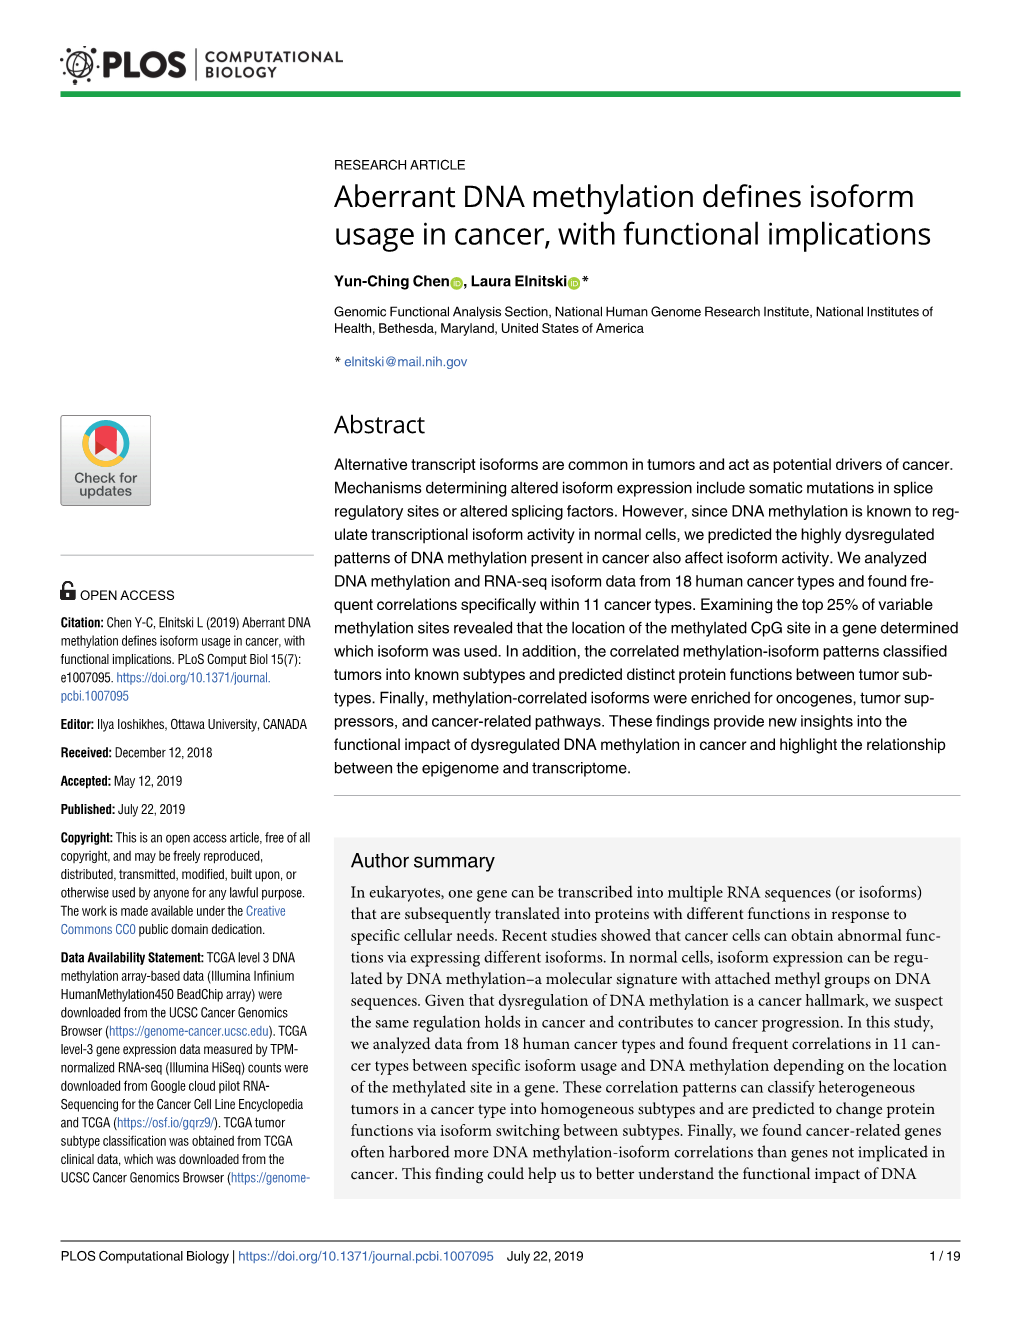 Aberrant DNA Methylation Defines Isoform Usage in Cancer, with Functional Implications